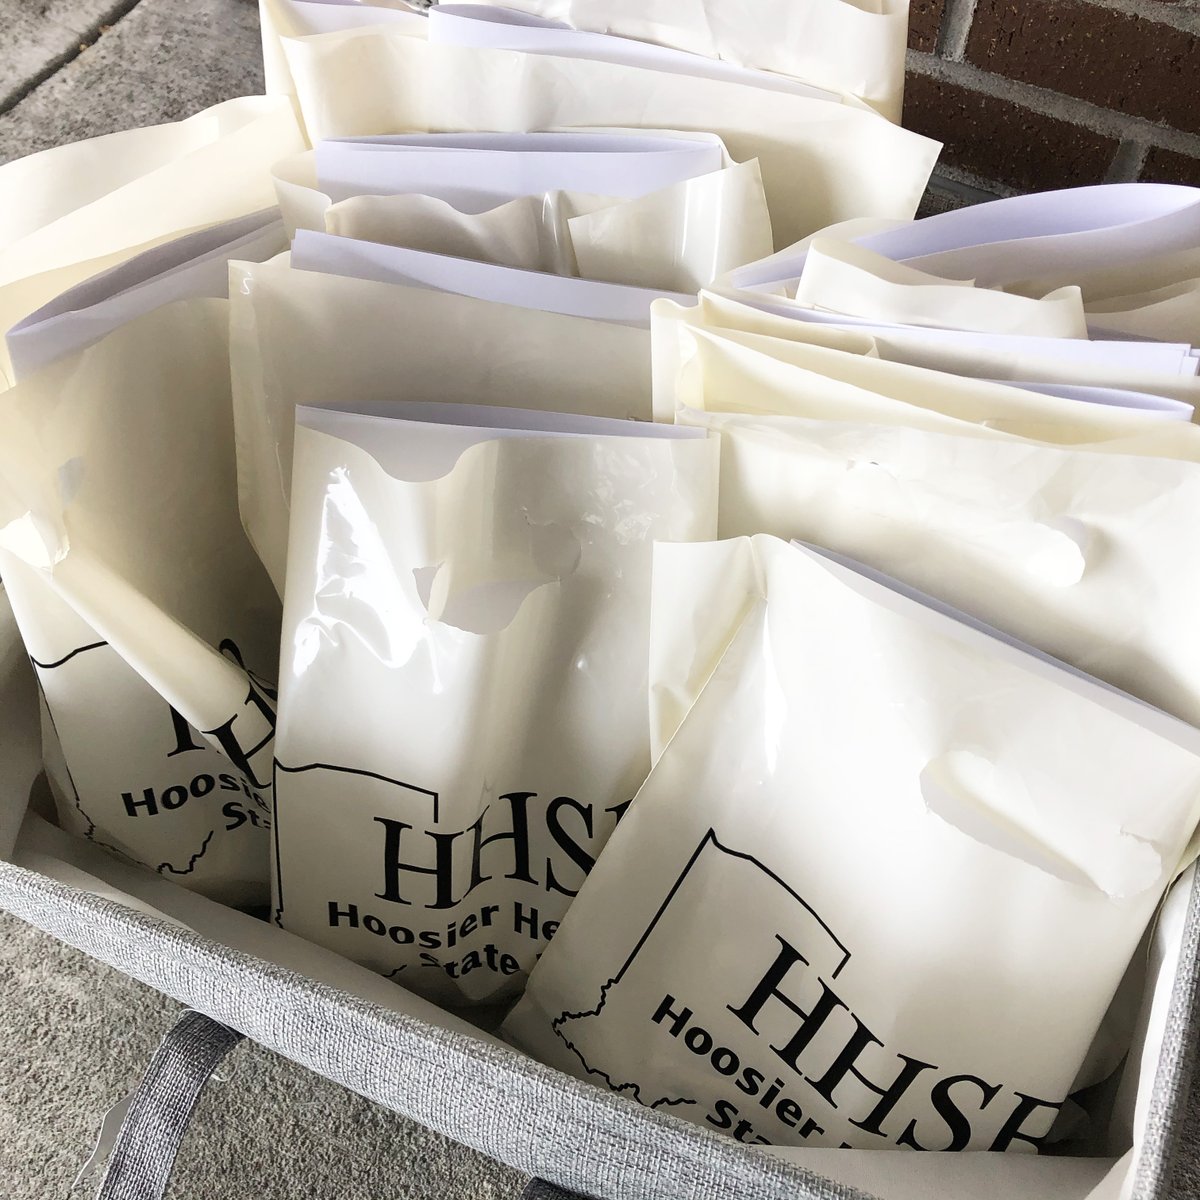 When Glow Girl Esthetics reached out to us with this unique idea to help local healthcare heroes, we were all in! We're happy our donation could help provide 40 #skincarekits to essential workers at Franciscan Health C'ville 😊

#communitybank #hhsbgivesback #facesonthefrontline